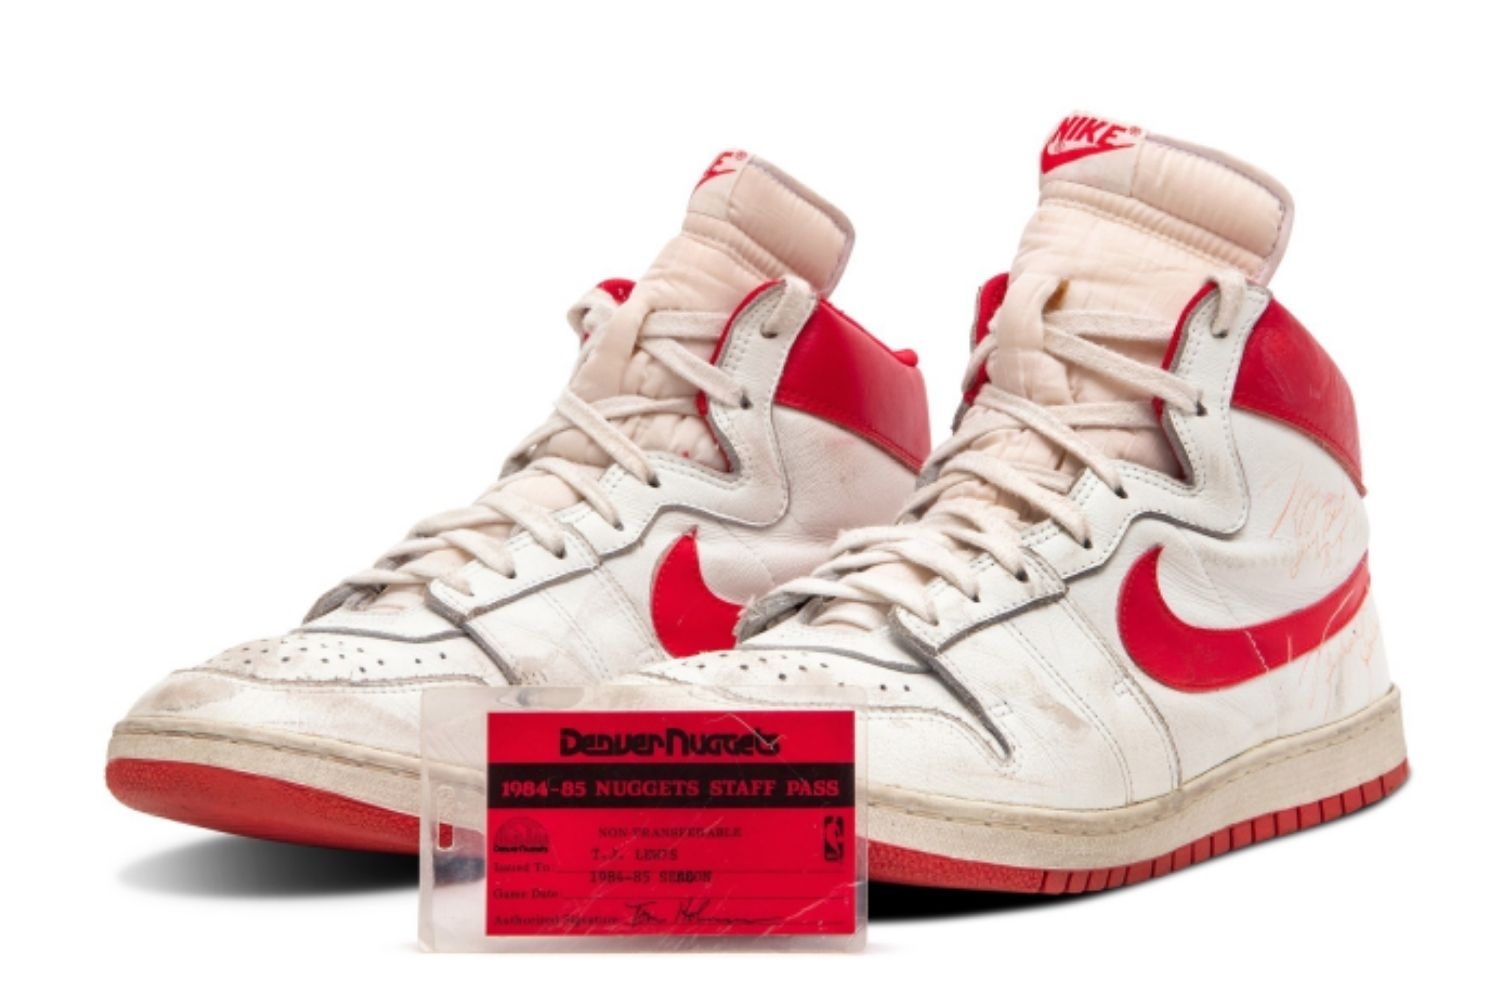 Nike Air Ships from 1984 sold for $1.47 million